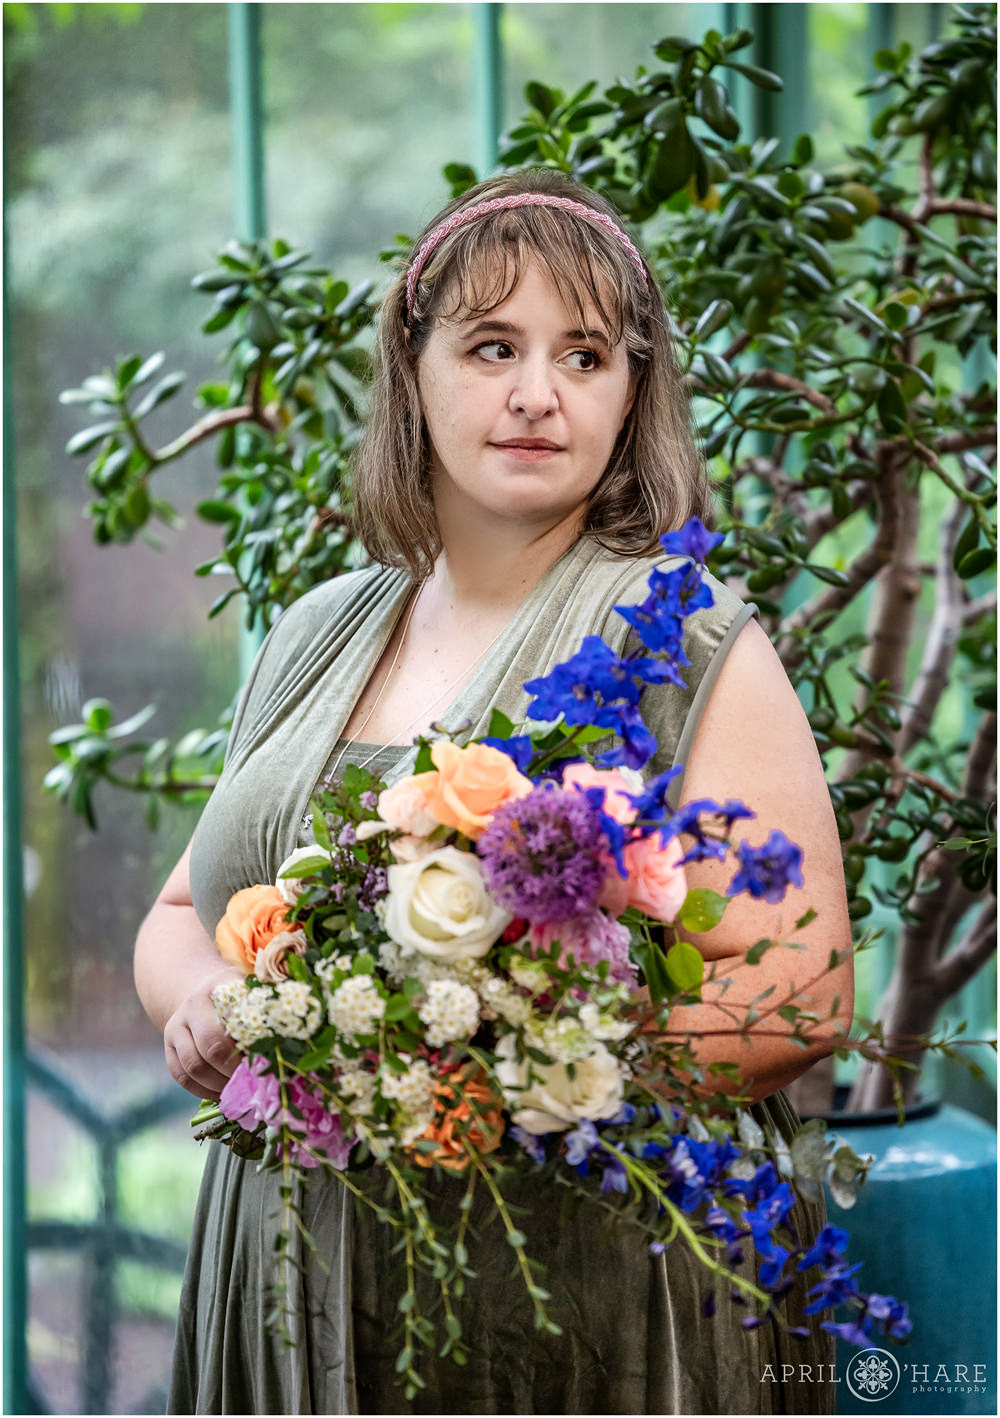 Matron of honor looks out at guests while standing in front of a Jade plant inside the Green Solarium at her friend's rainy wedding day at Denver Botanic Gardens